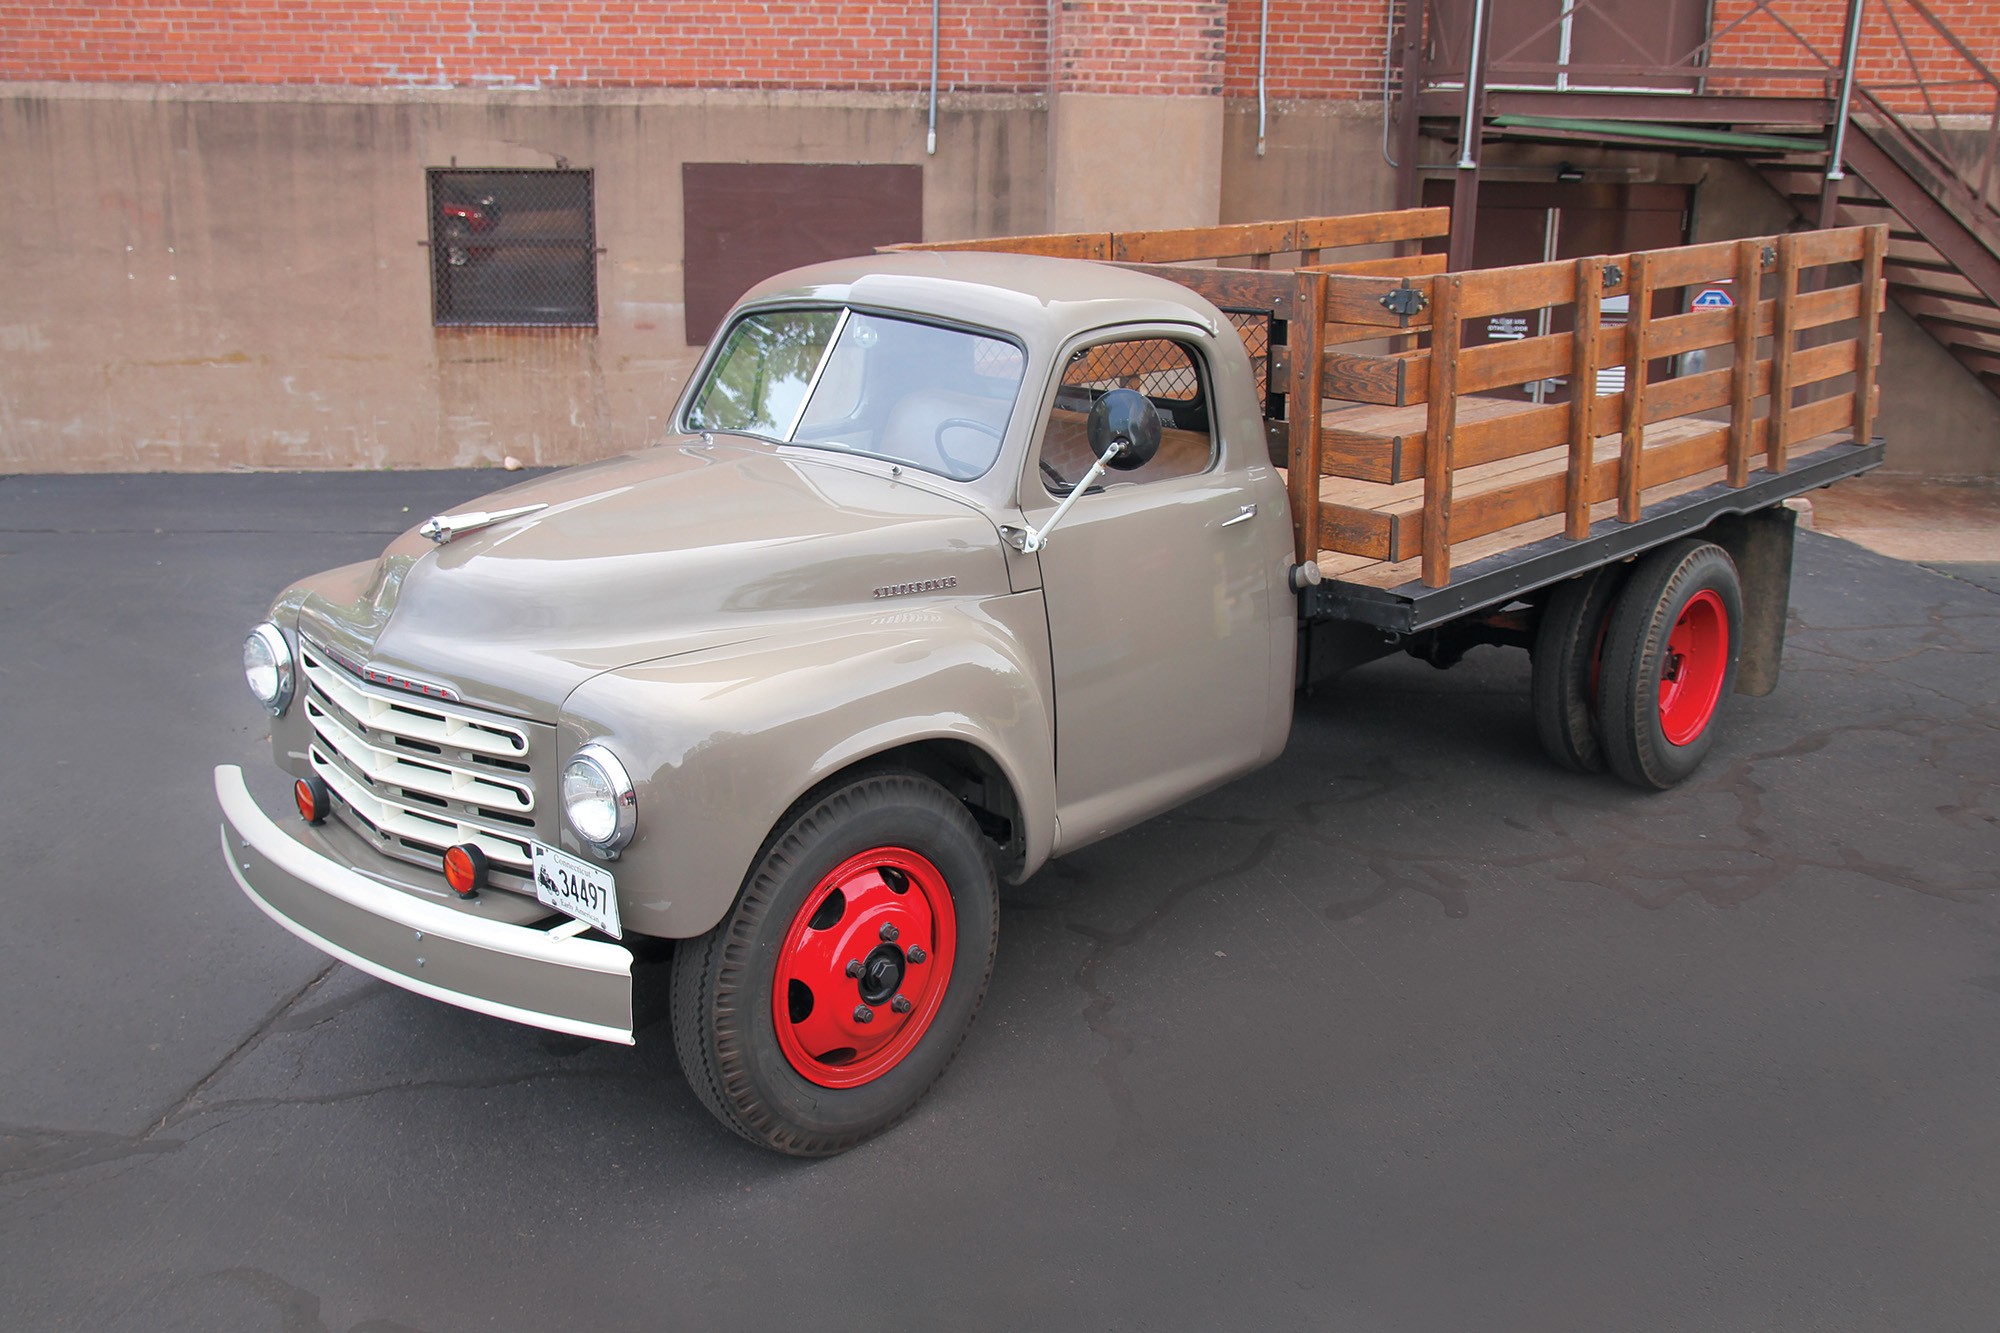 After A Full Restoration, This 1949 Studebaker 2R16 Stake Bed Truck Resumed Its Role As A Work Truck